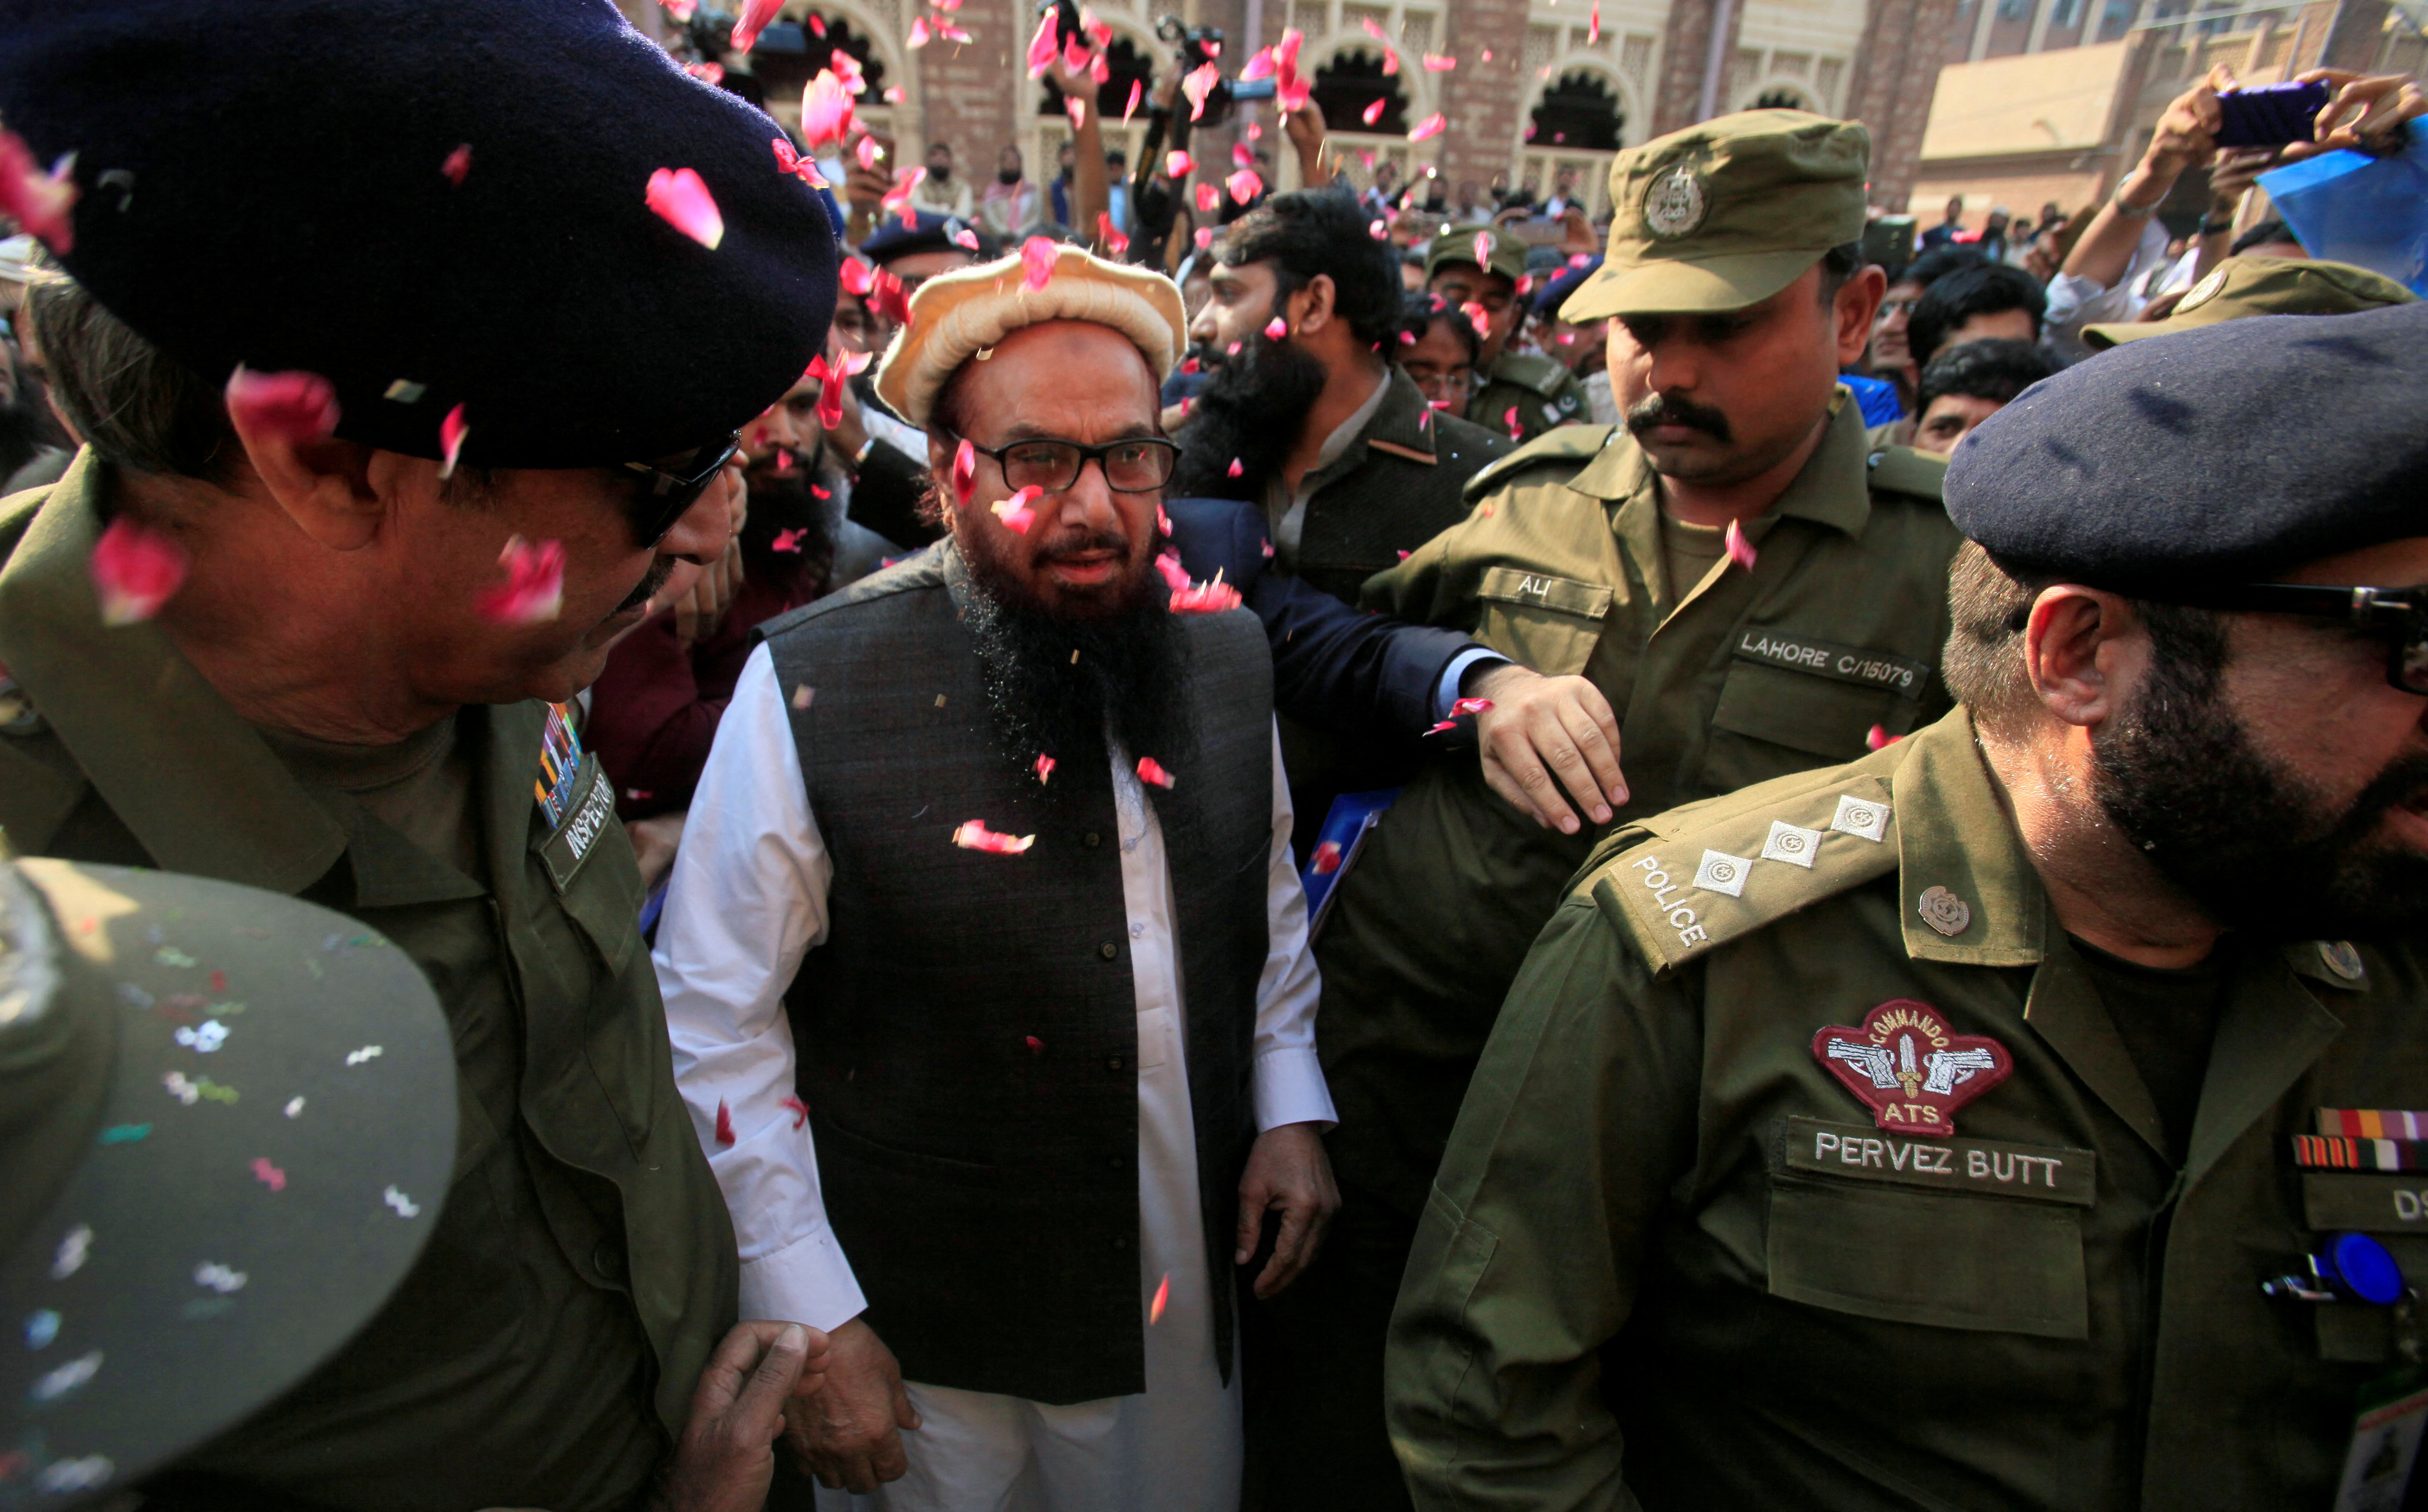 Hafiz Saeed is showered with flower petals as he walks to court before a Pakistani court ordered his release from house arrest in Lahore